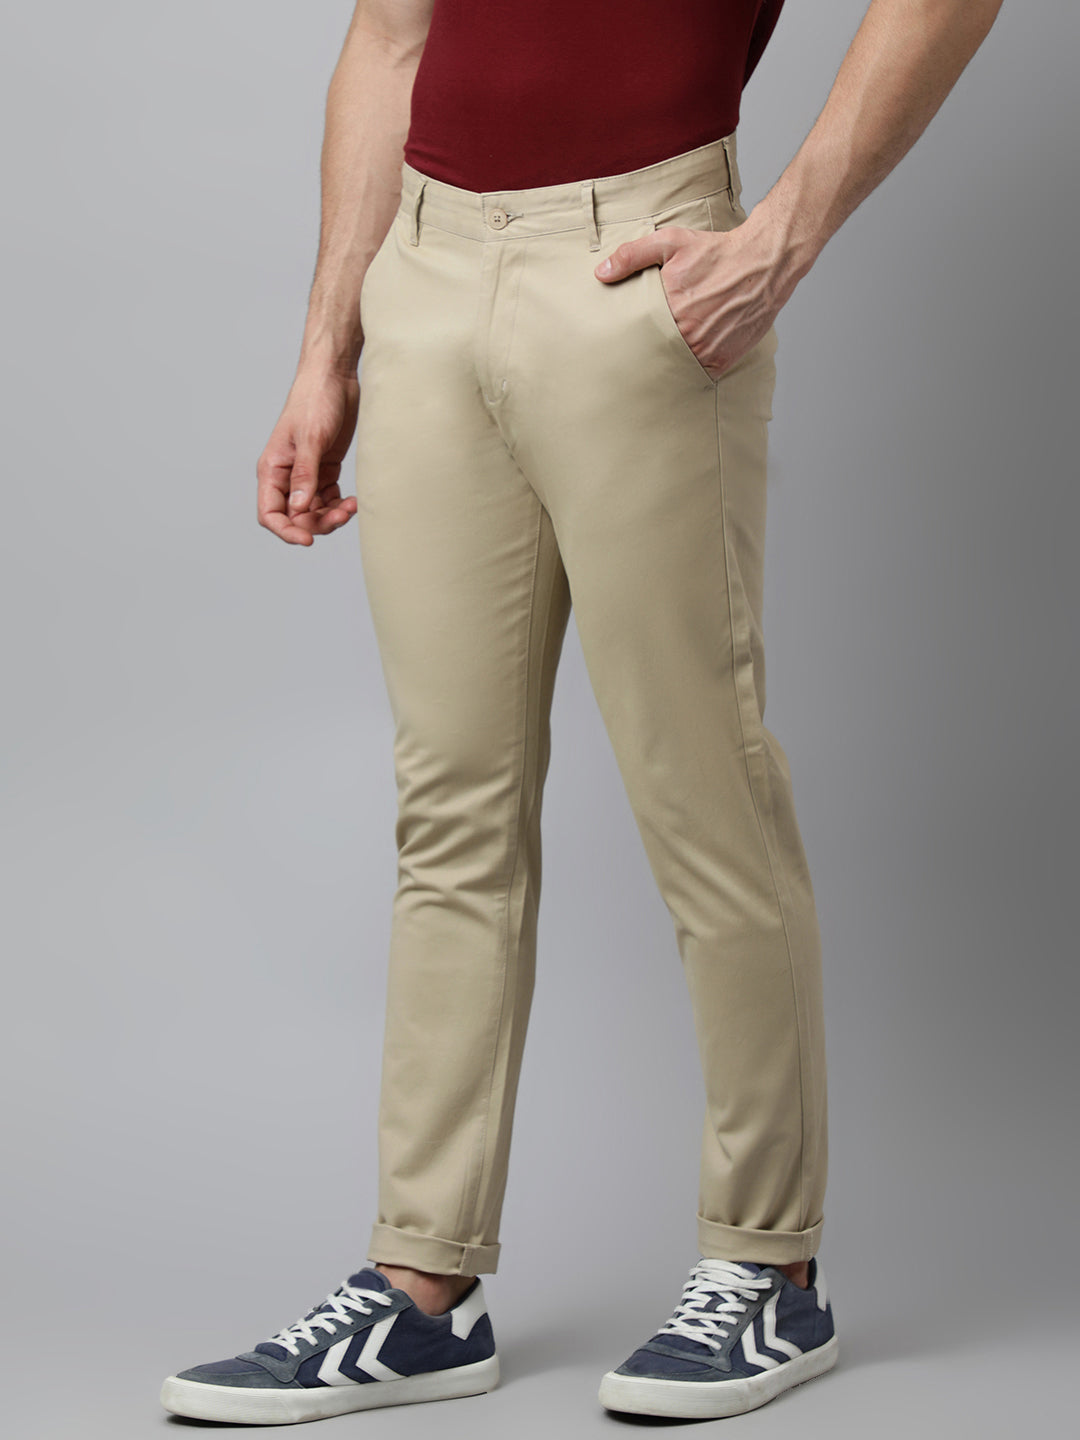 Even for John Daly, these pants are ludicrous | John daly, Men casual, Pants